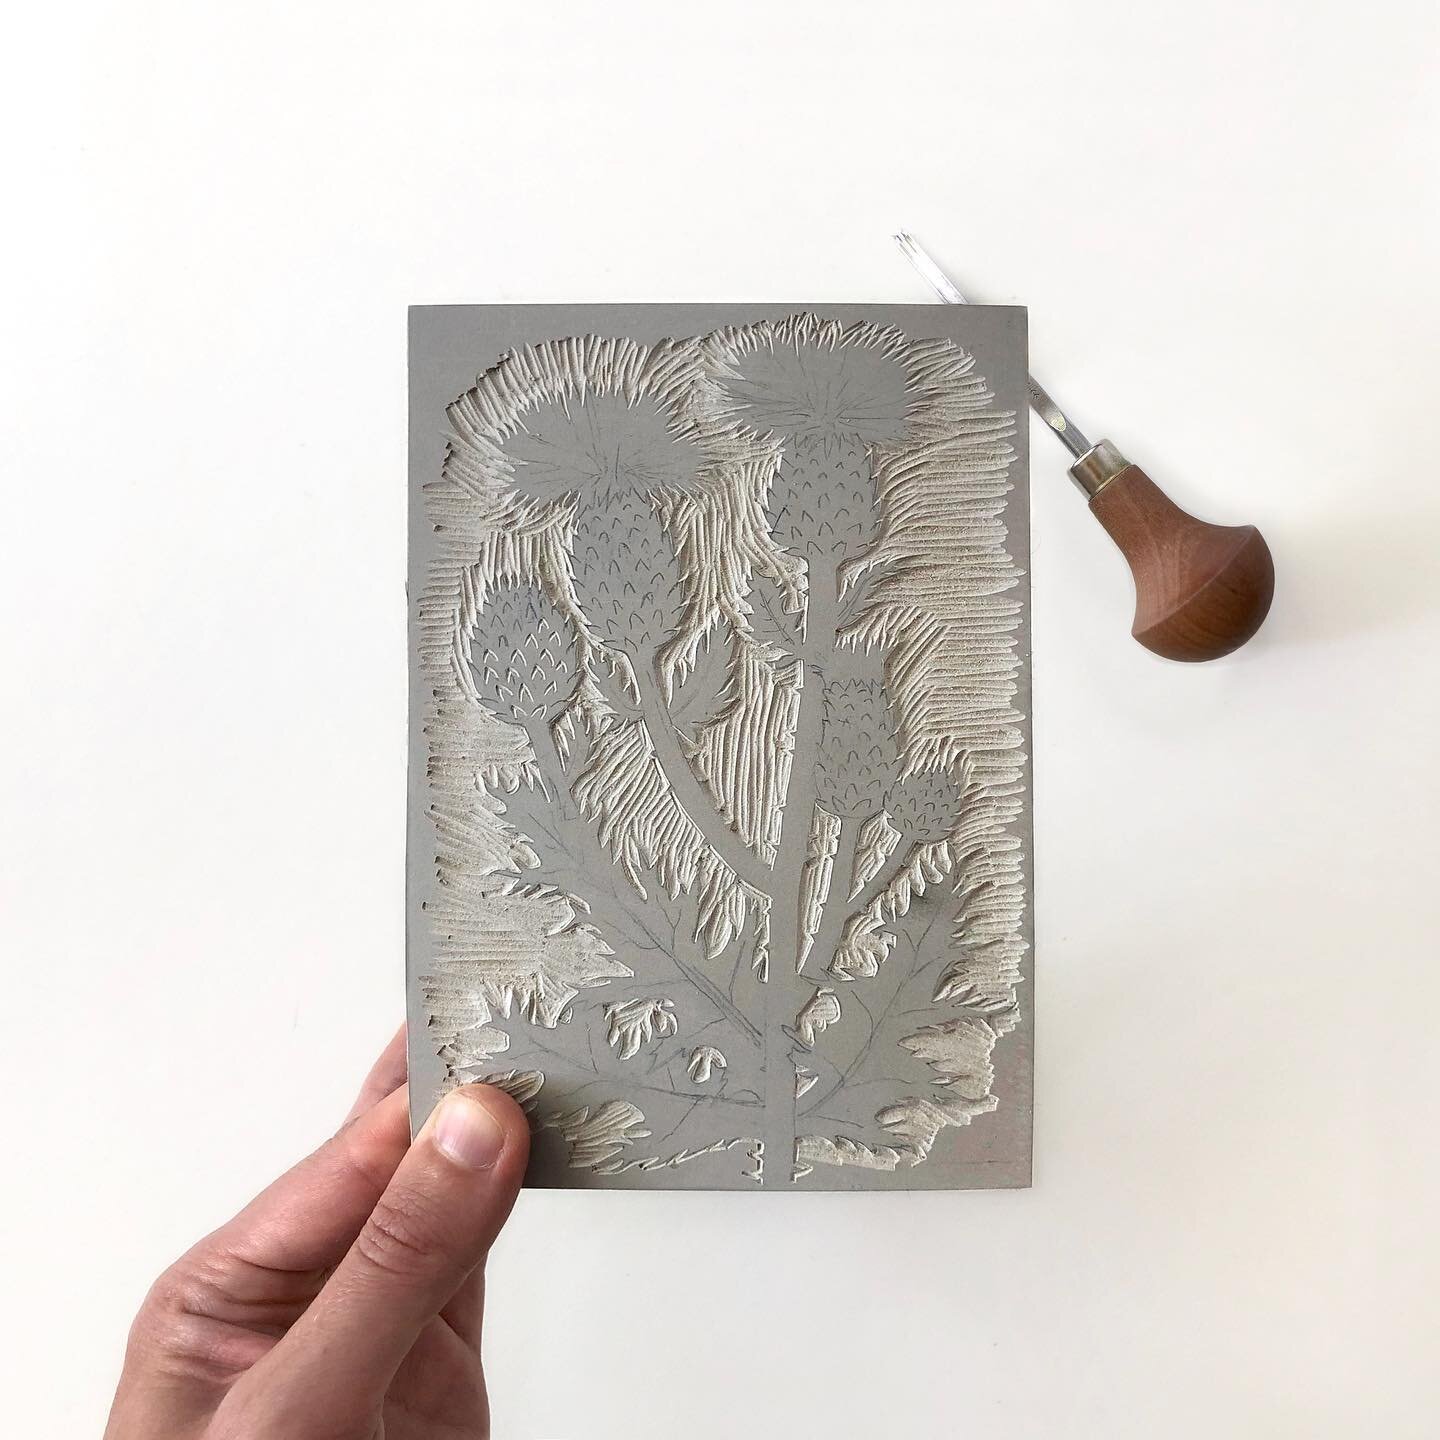 Work in progress carving this little linocut this morning. I&rsquo;m planning to print it this afternoon but need to add in more detail first. It&rsquo;ll be part of a set of 3, inspired by my recent holiday in Norfolk 

#printprocess #print #lino #l